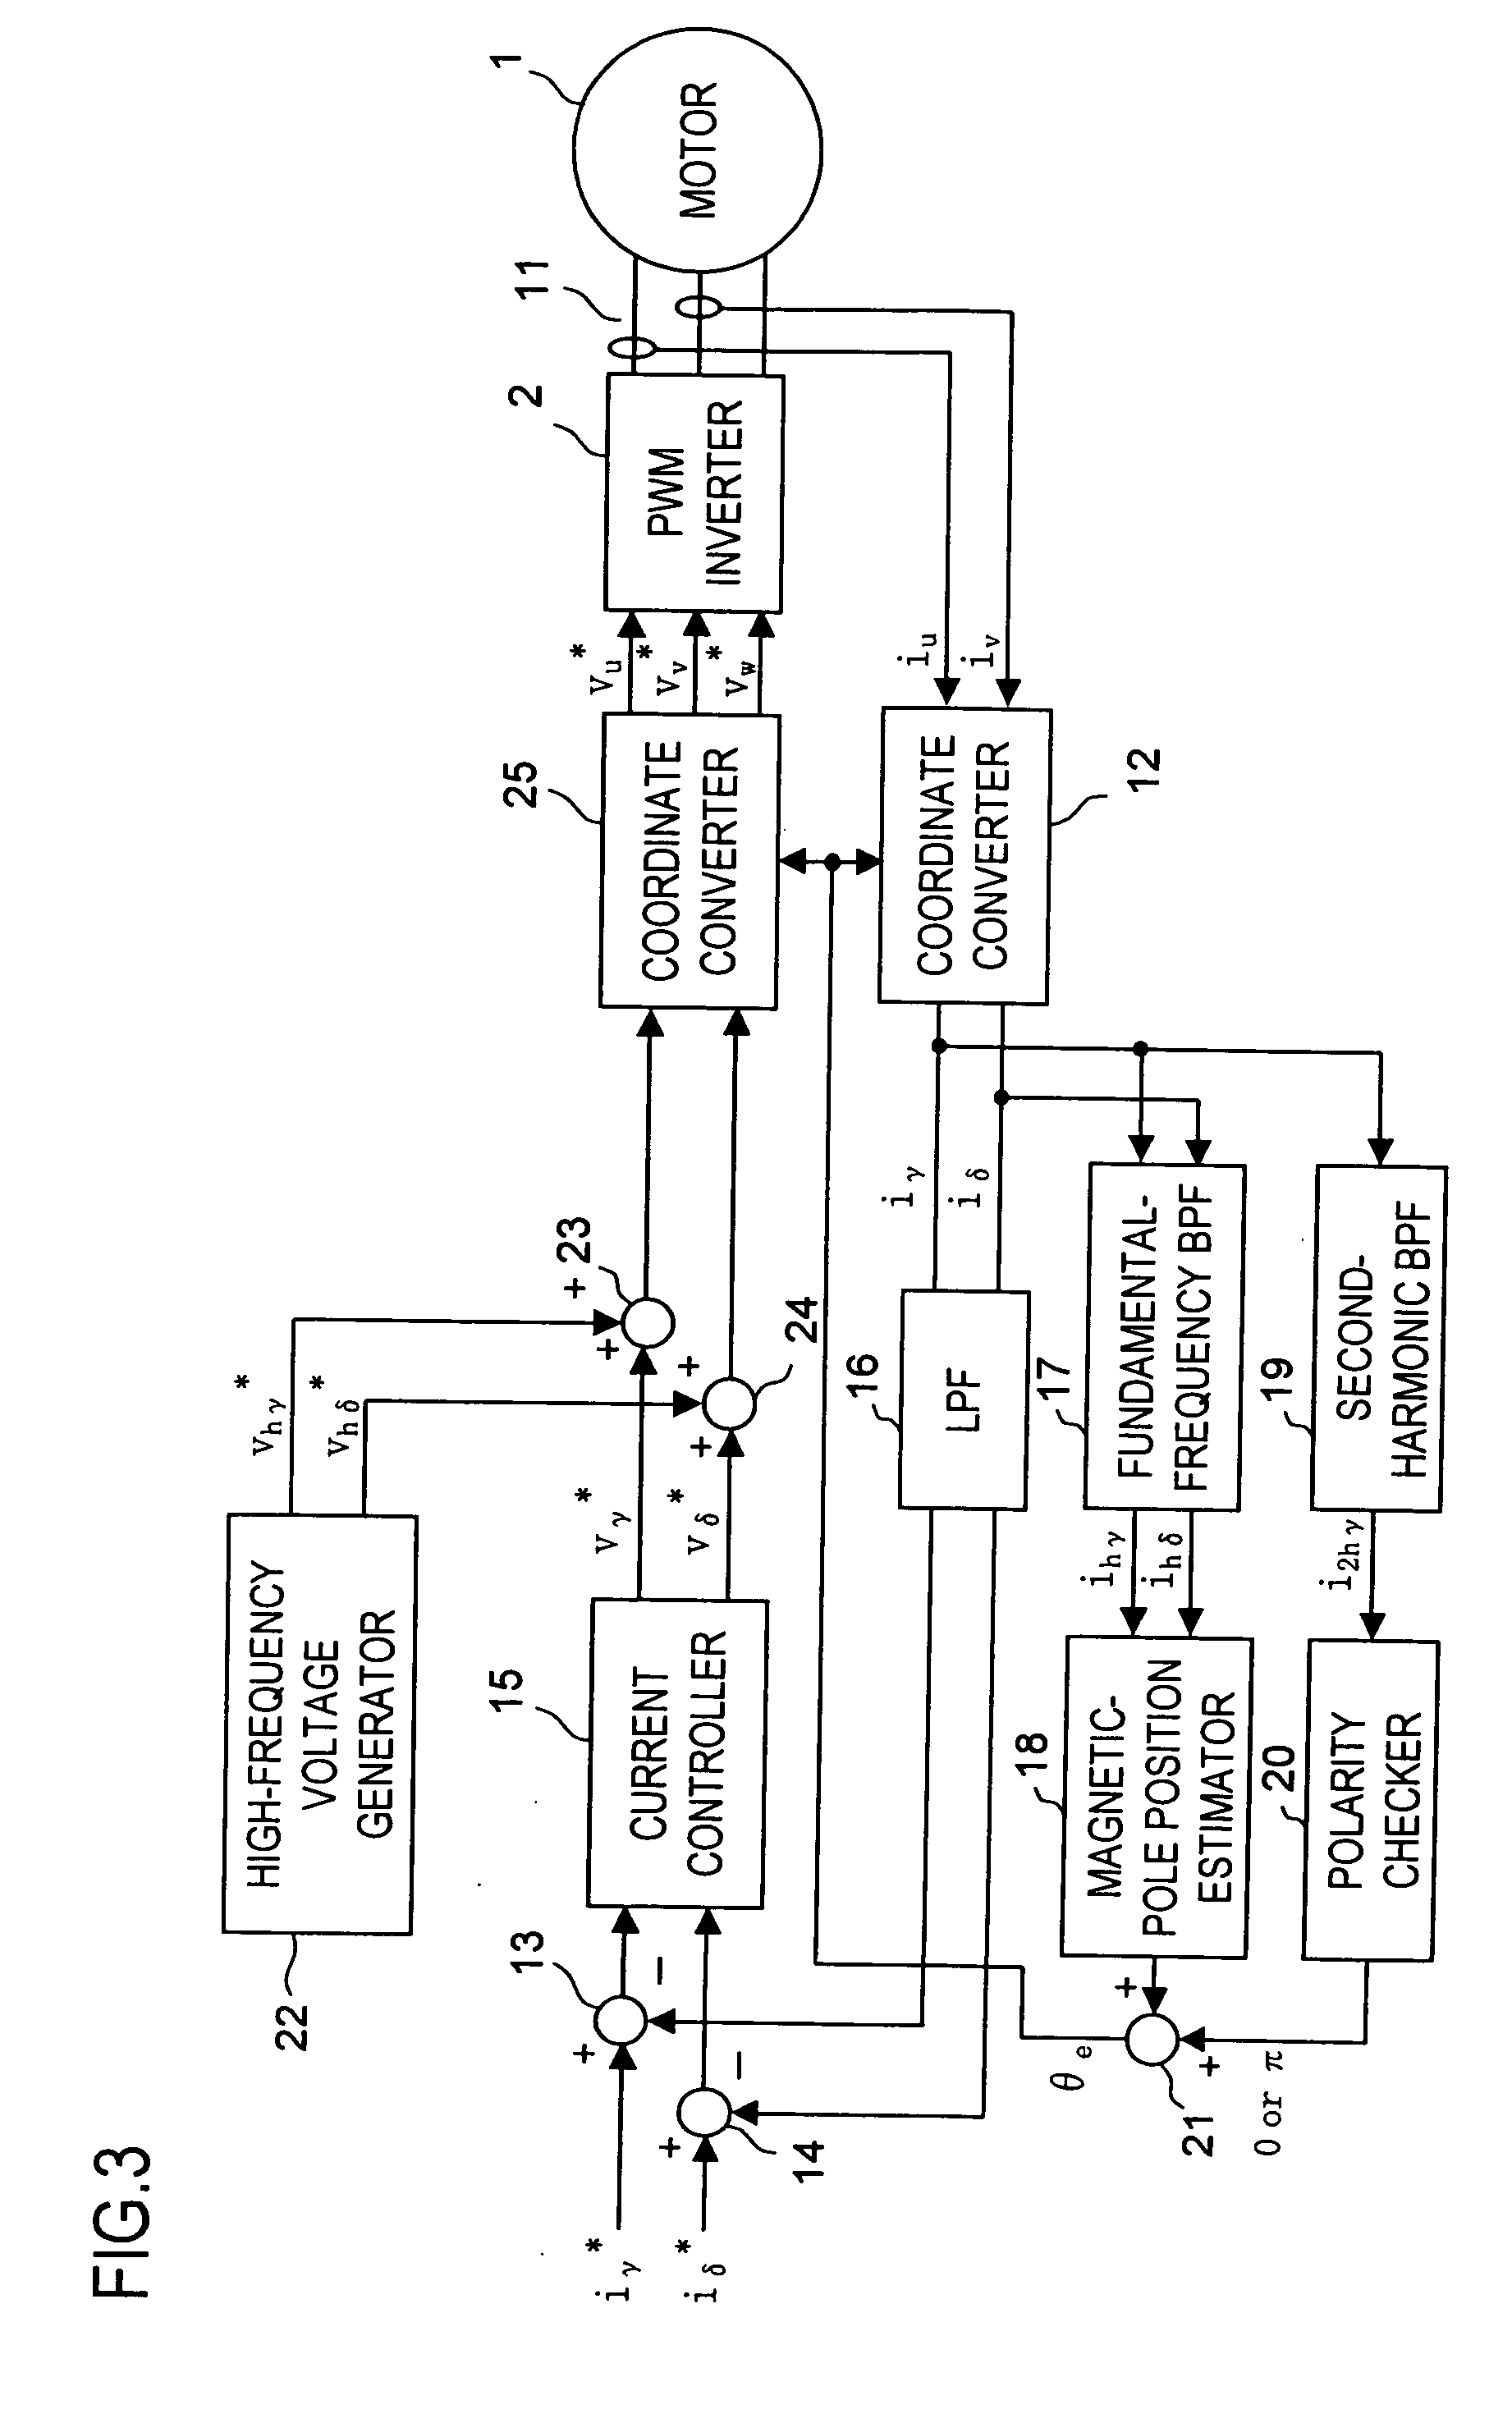 Motor driving control device